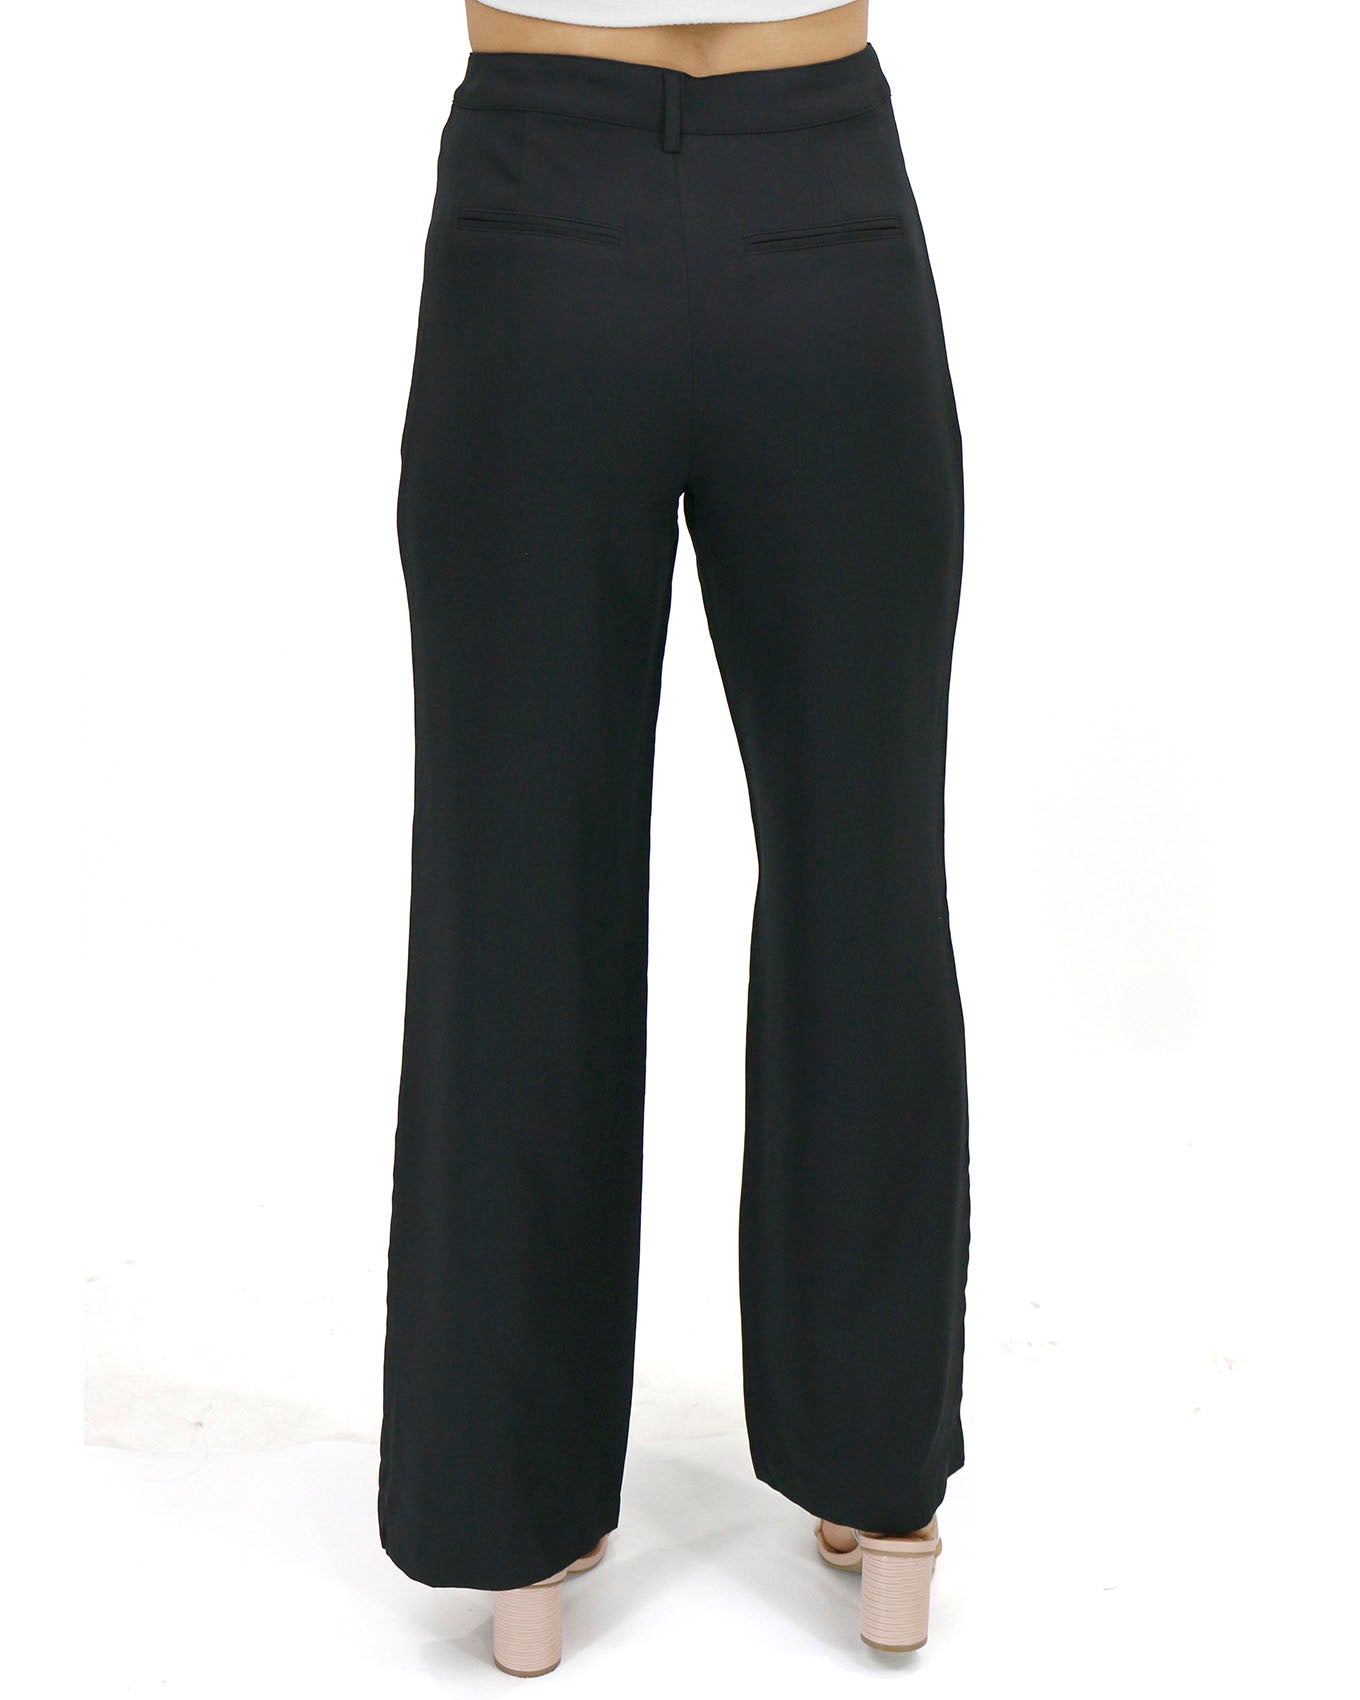 Fab Fit Navy Work Pant - Straight Leg - Grace and Lace